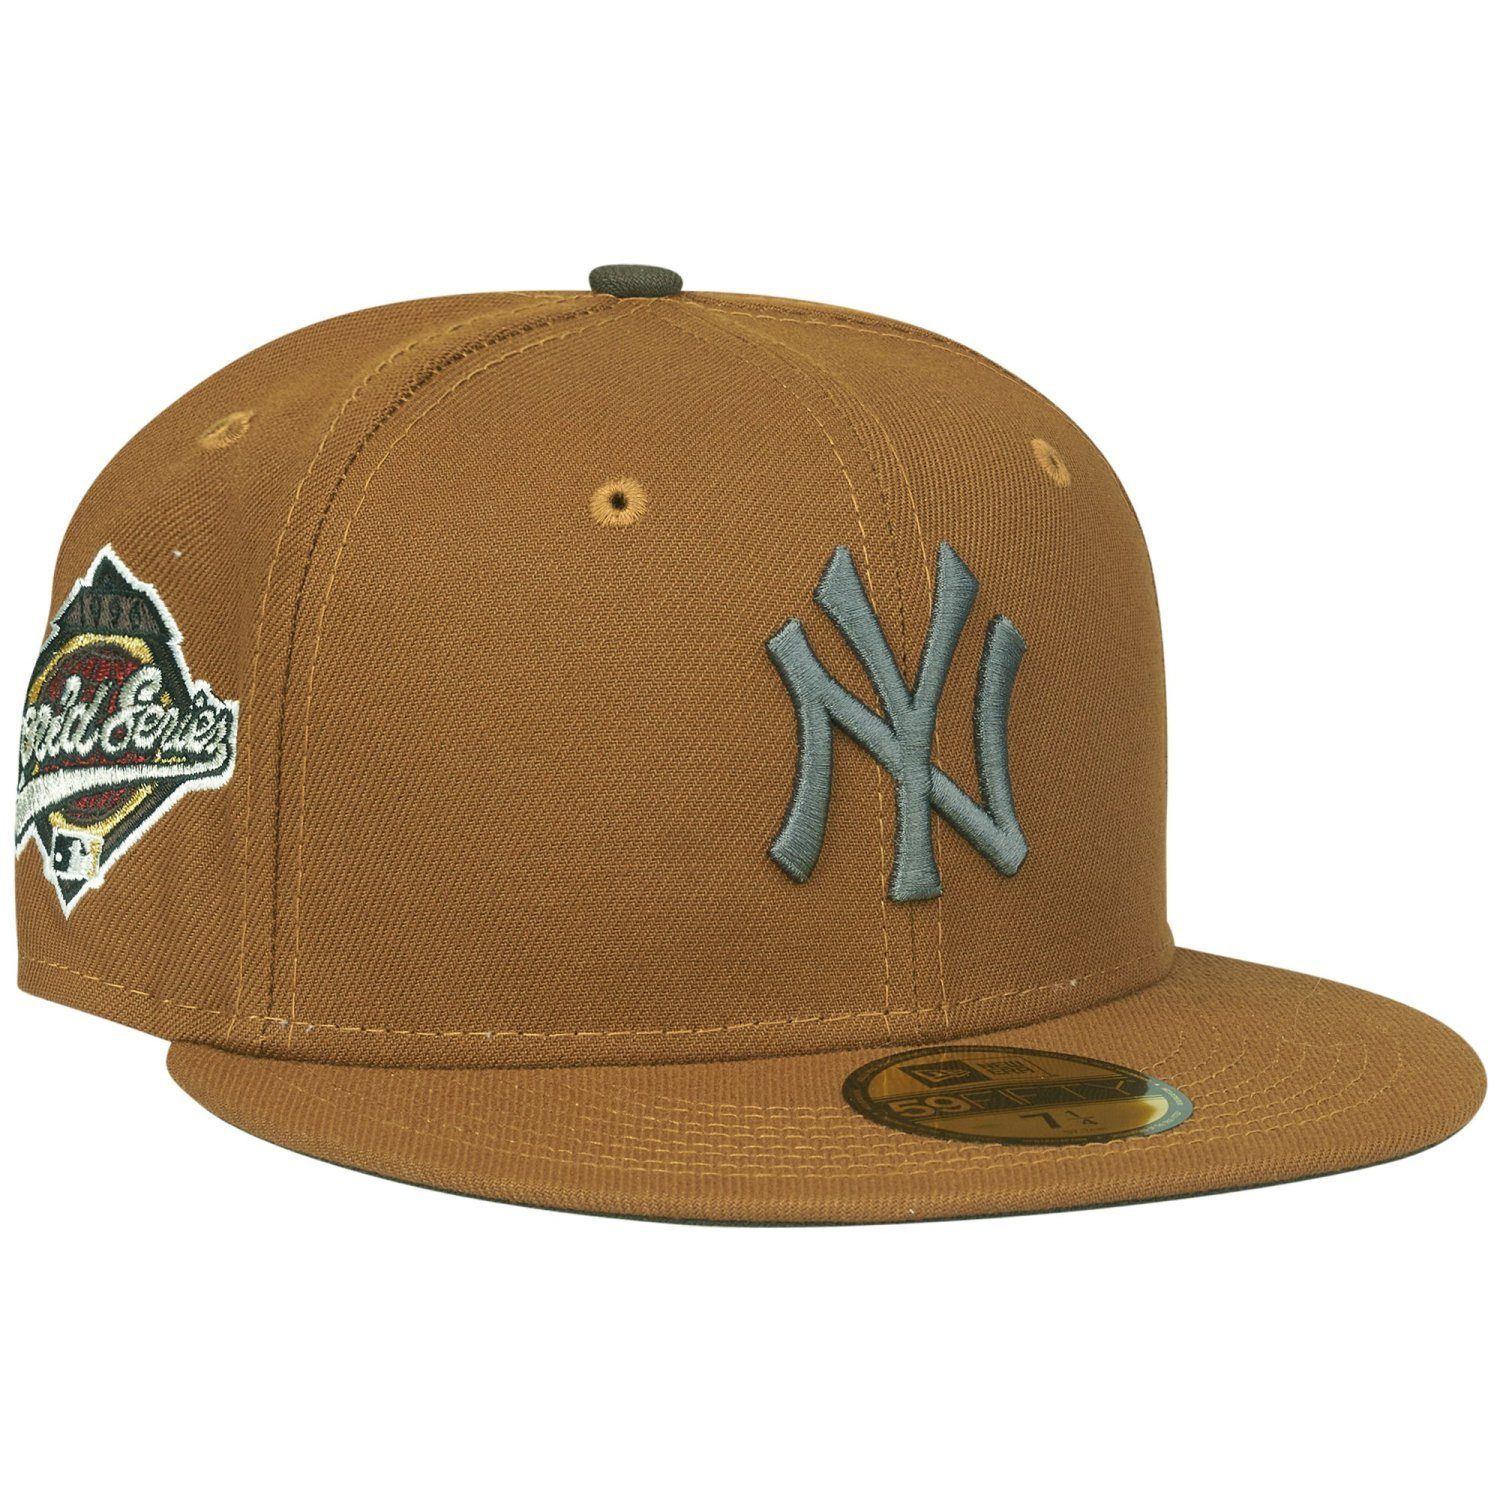 New Era Fitted Cap 59Fifty WORLD SERIES 1996 NY Yankees | Fitted Caps